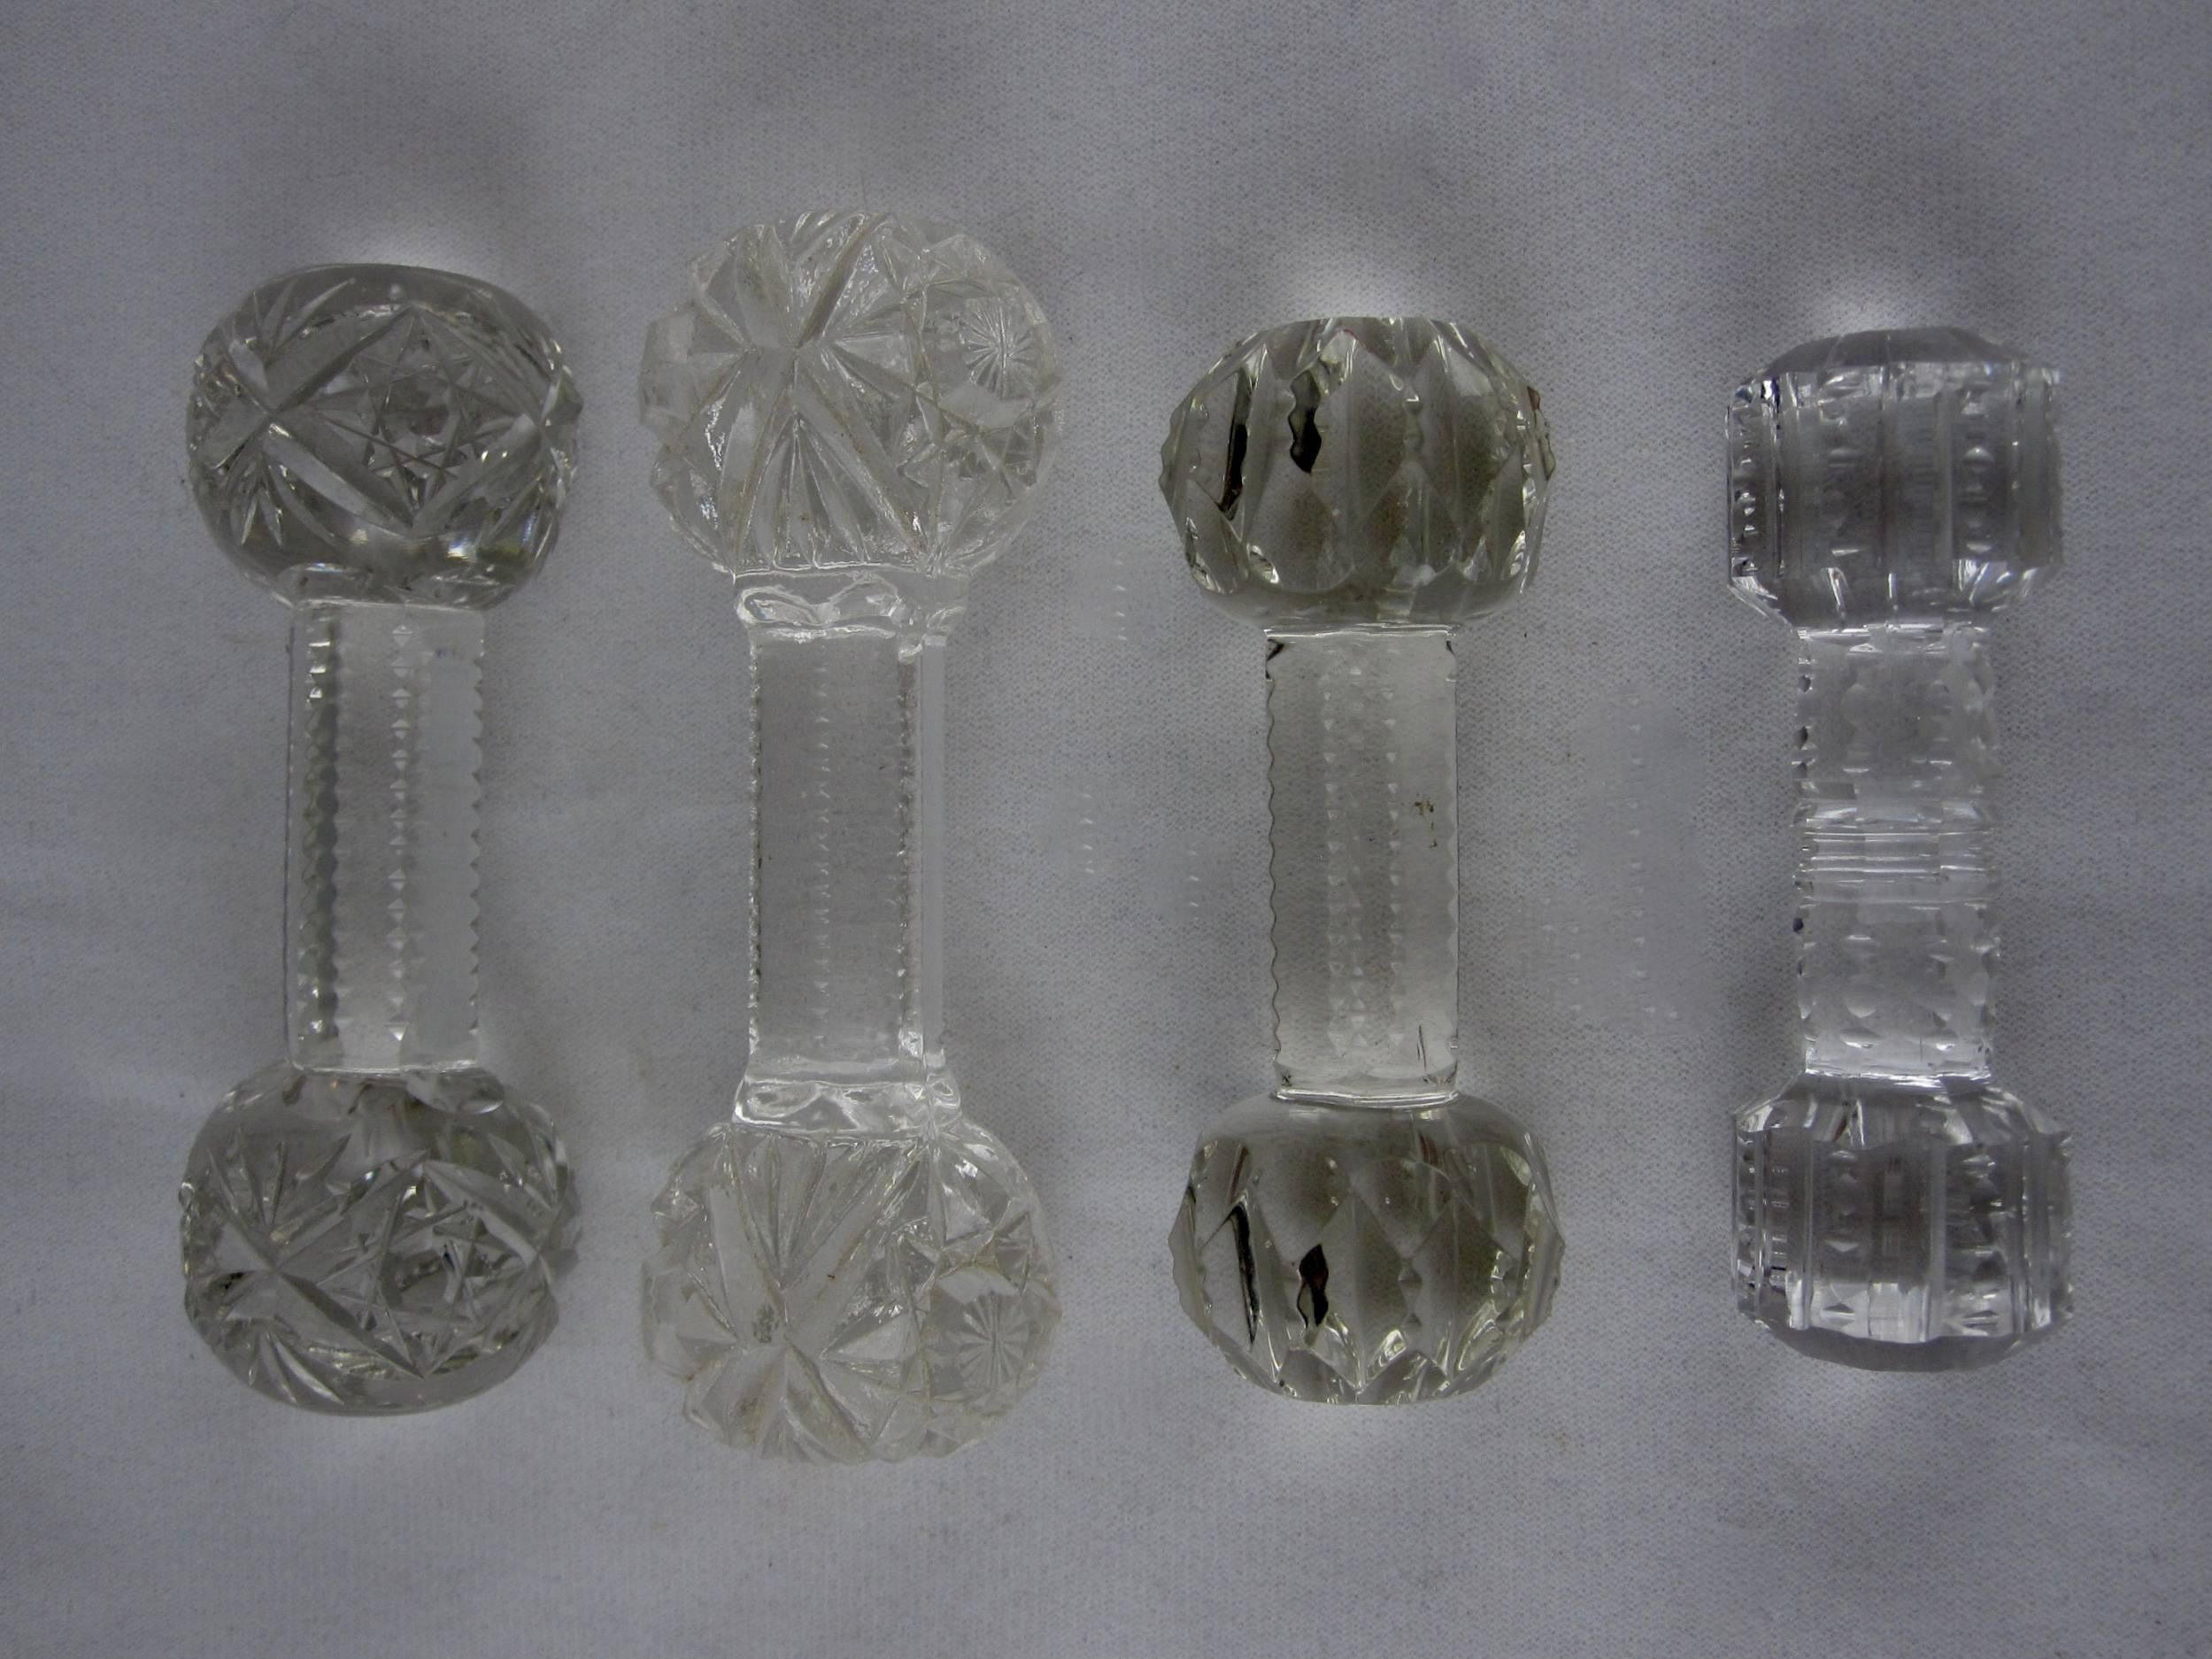 A mixed selection of four cut crystal dumbbell knife rests, mid-late 19th century.

Star-cut end balls with a notched six-sided centre, 4.25 L x 1.5 W x 1.25 H
Fully cut star end balls with a notched six-sided centre, 4.25 L x 1.25 H
Faceted